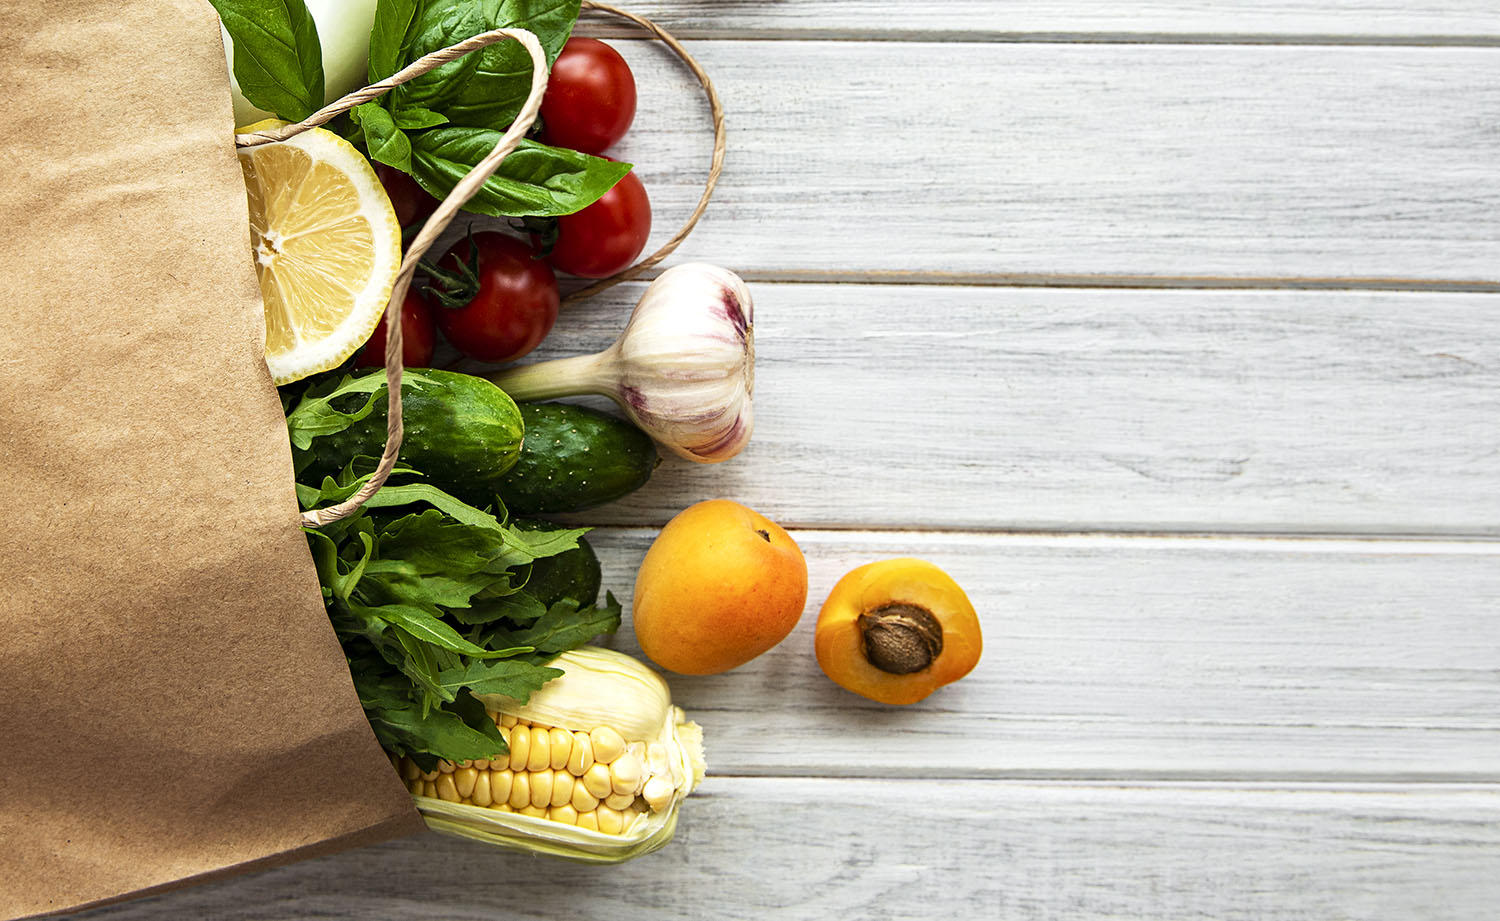 Healthy food background. Healthy  food in paper bag, vegetables and fruits.  Shopping food supermarket and clean vegan eating concept.